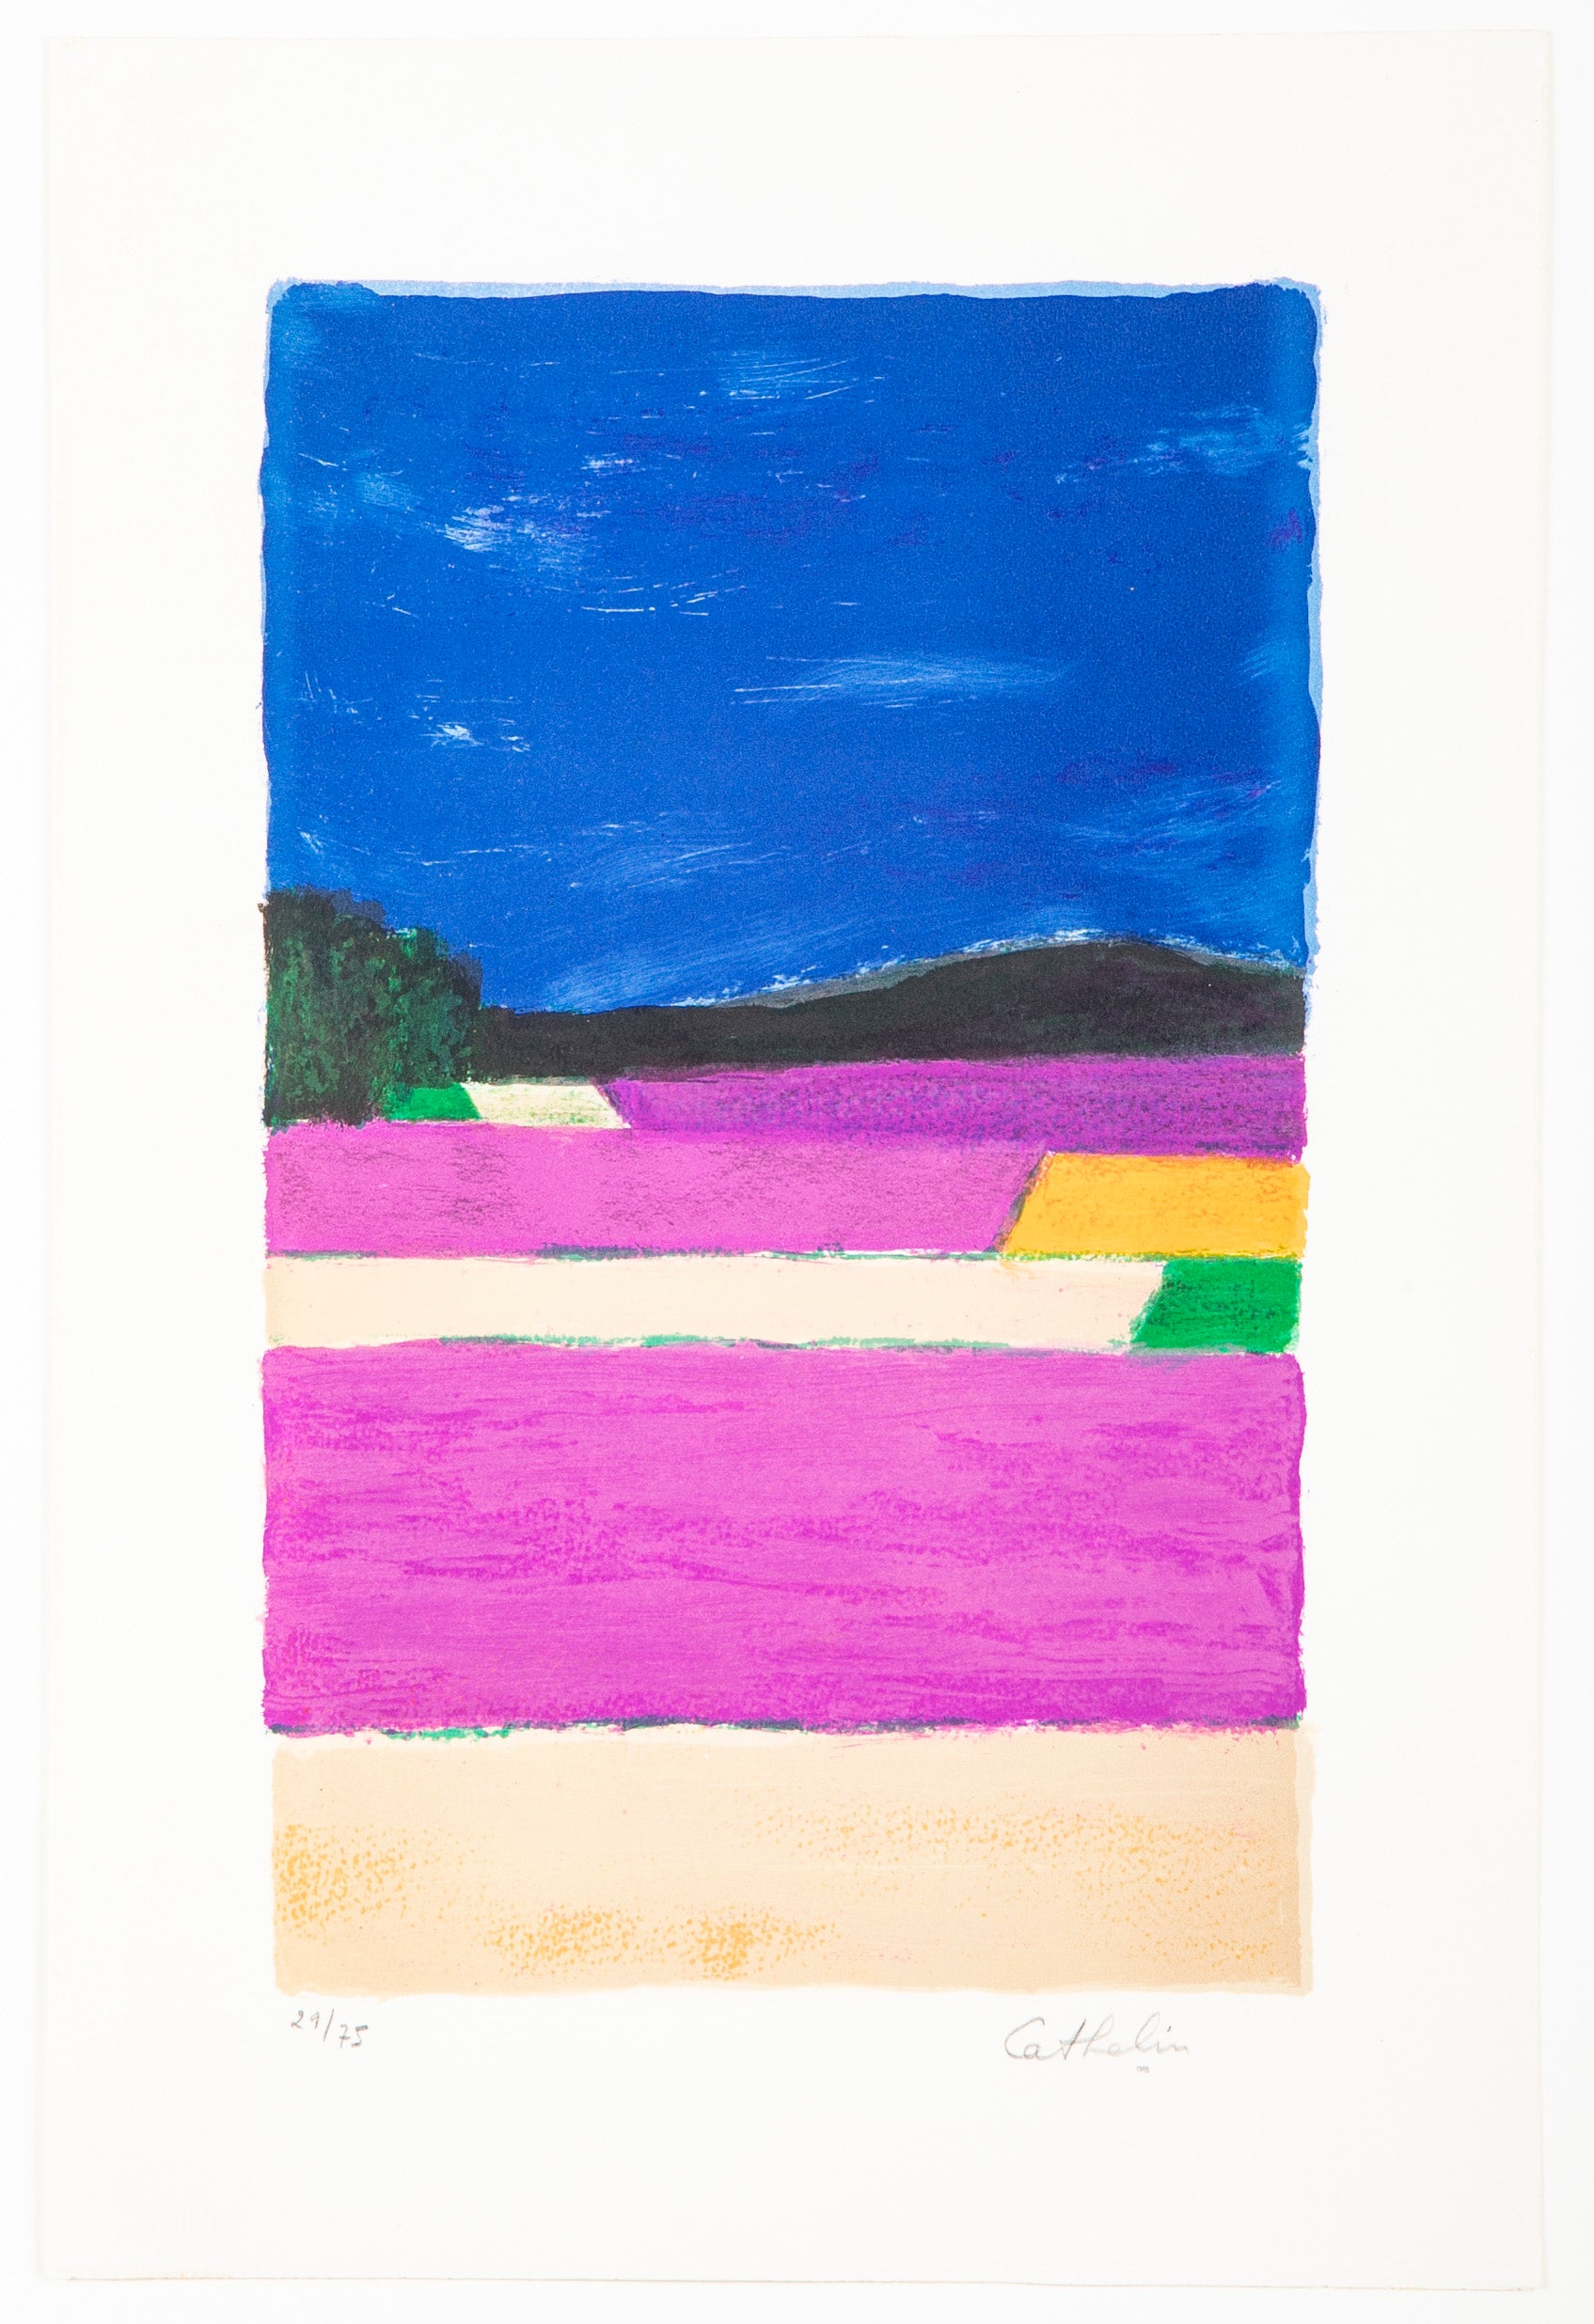 "Lavender Field" Lithograph in Colors by Bernard Cathelin